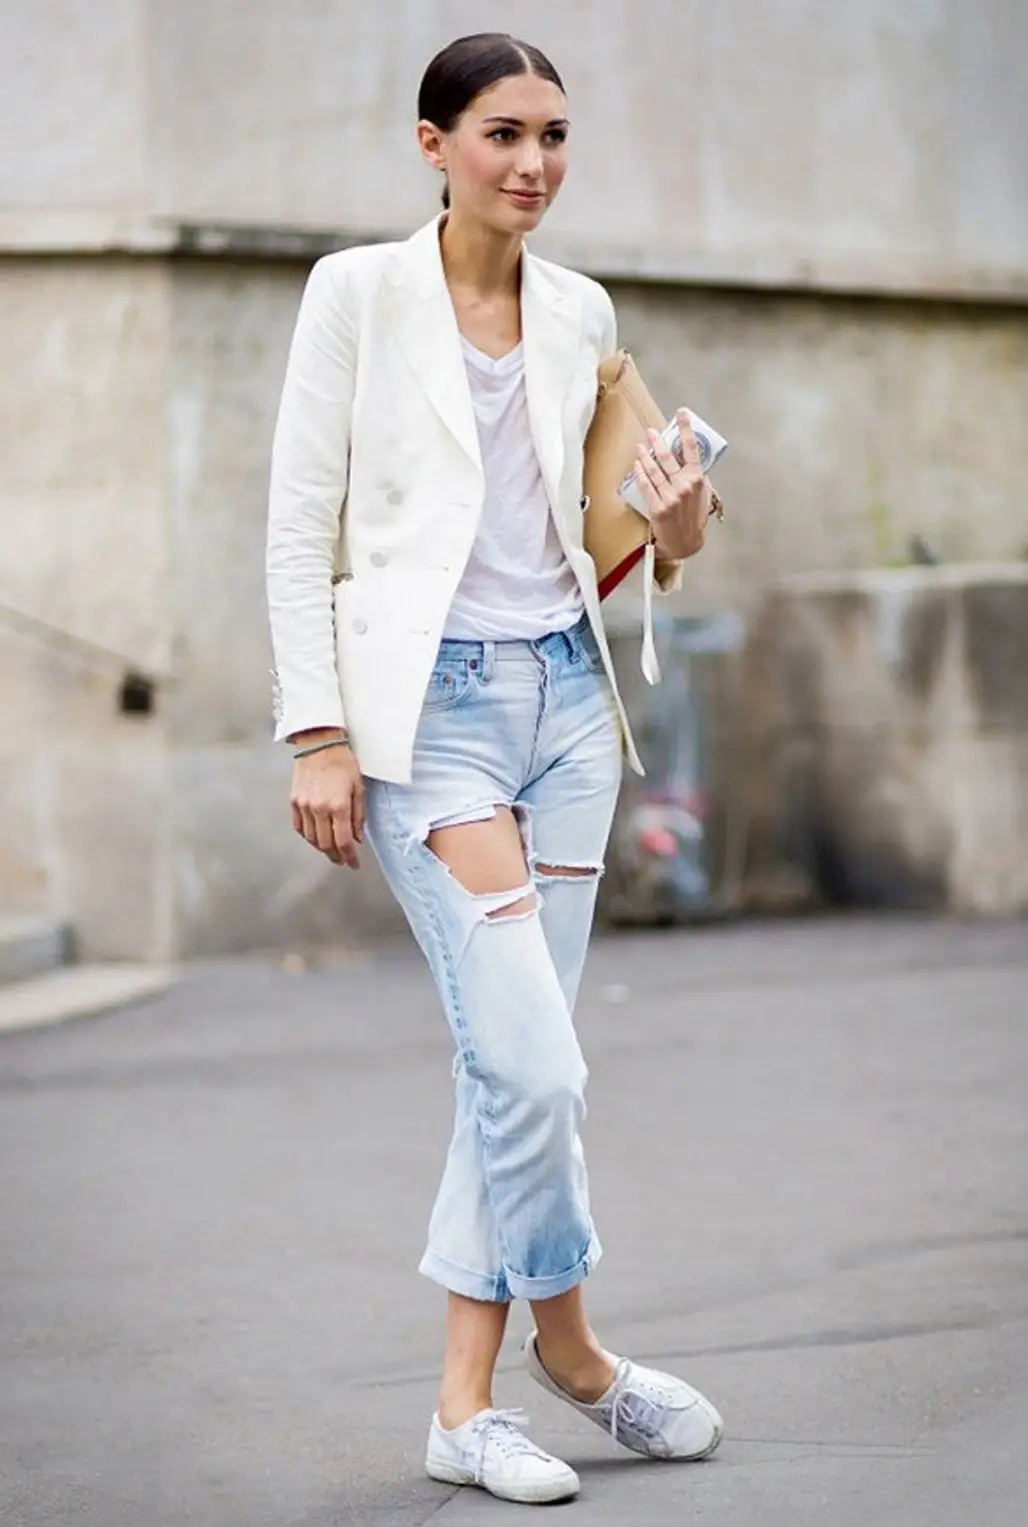 Style Maven:Distressed Jeans, White Tee